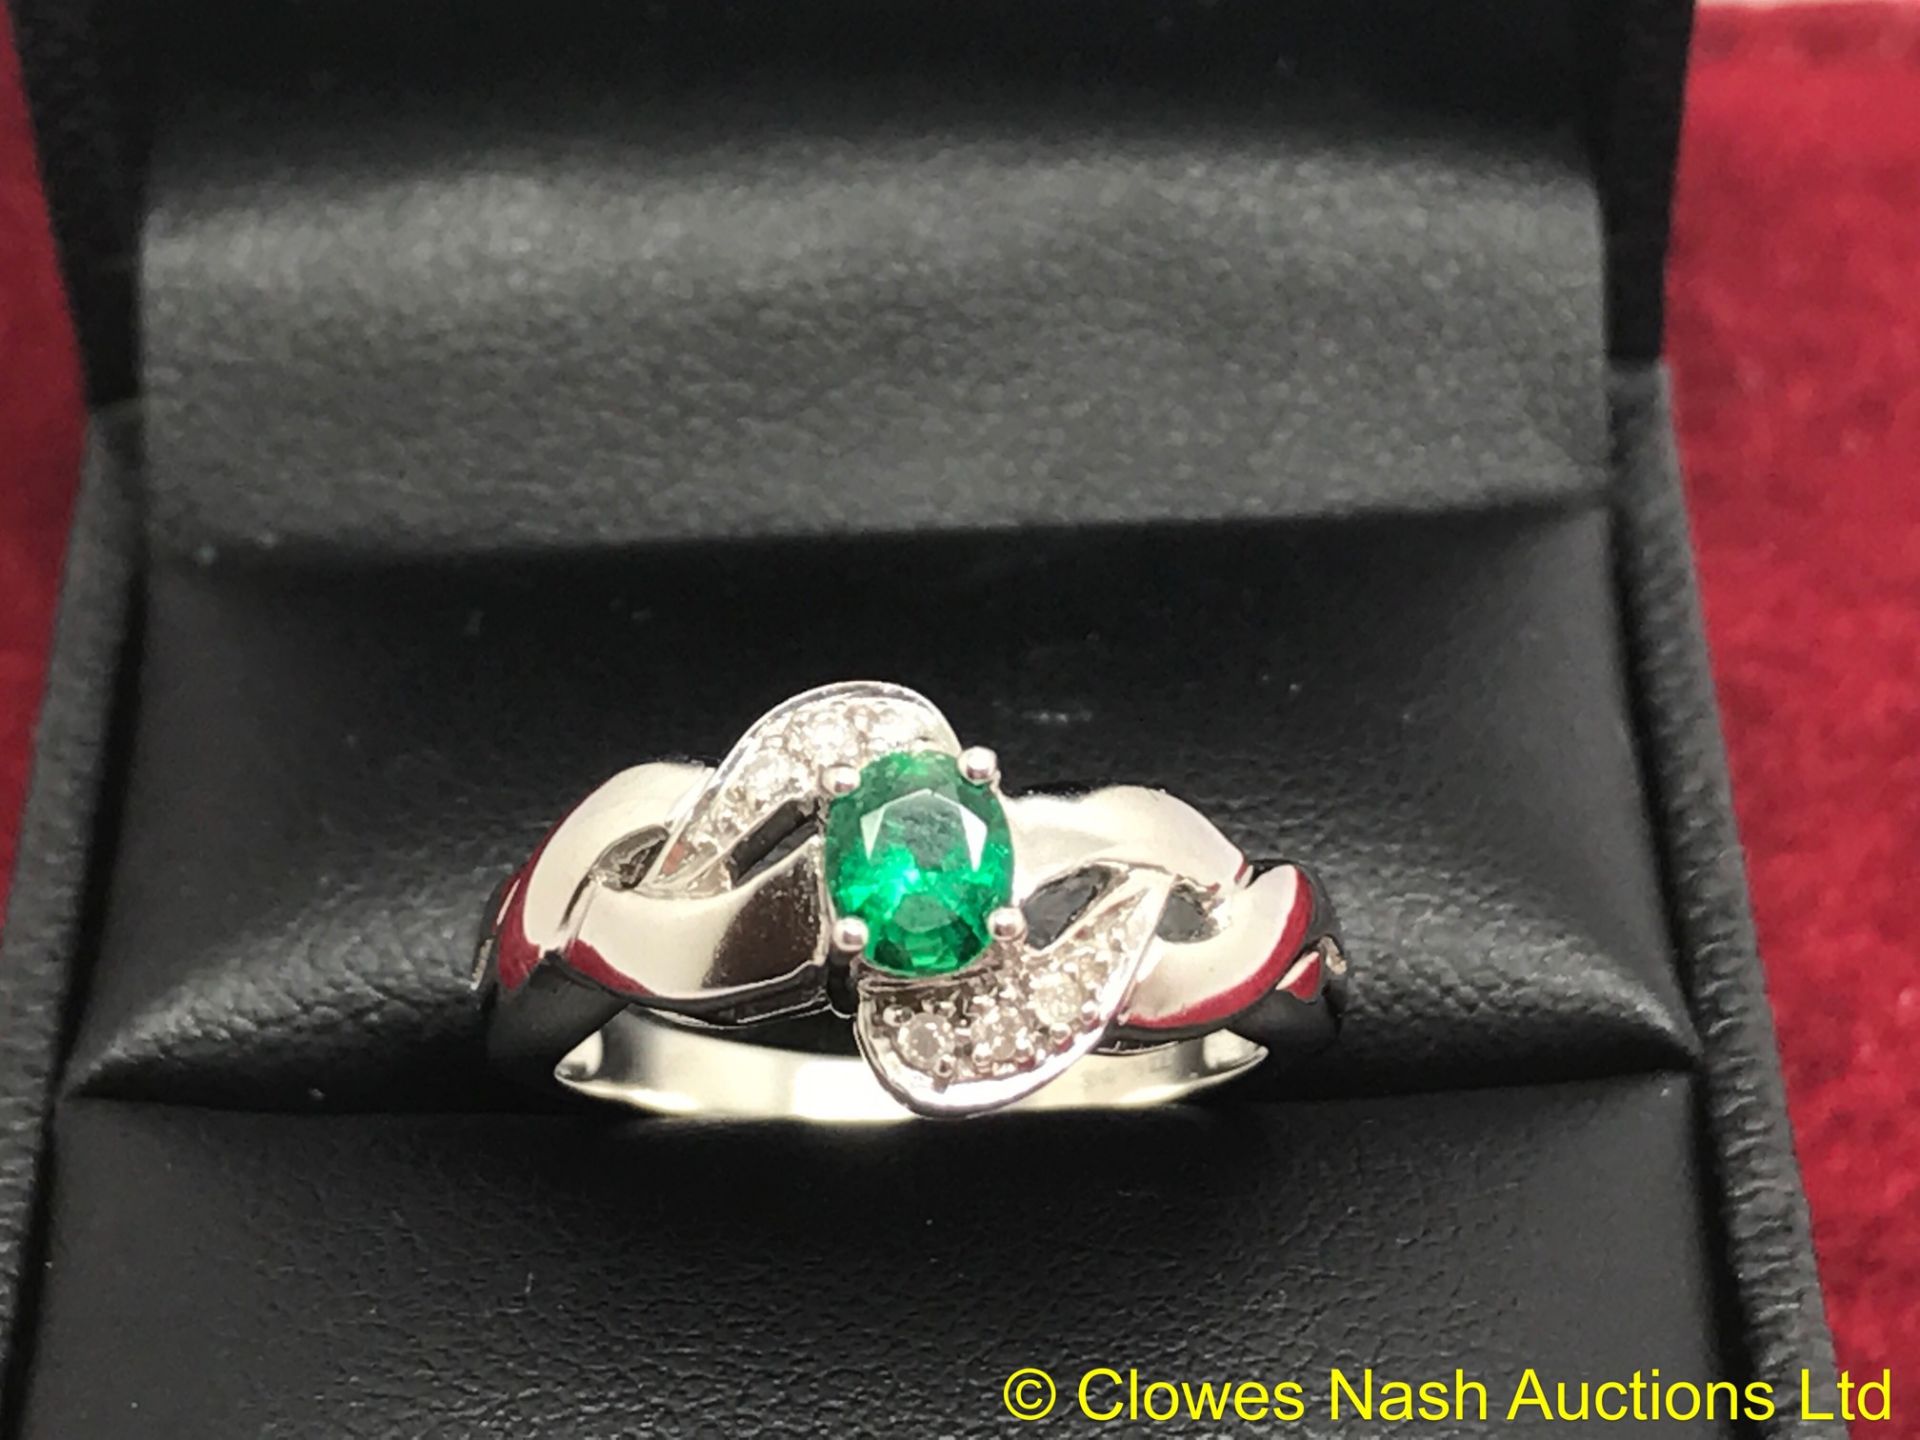 18ct WHITE GOLD EMERALD & DIAMOND RING MARKED 750 TESTED FOR 18ct GOLD